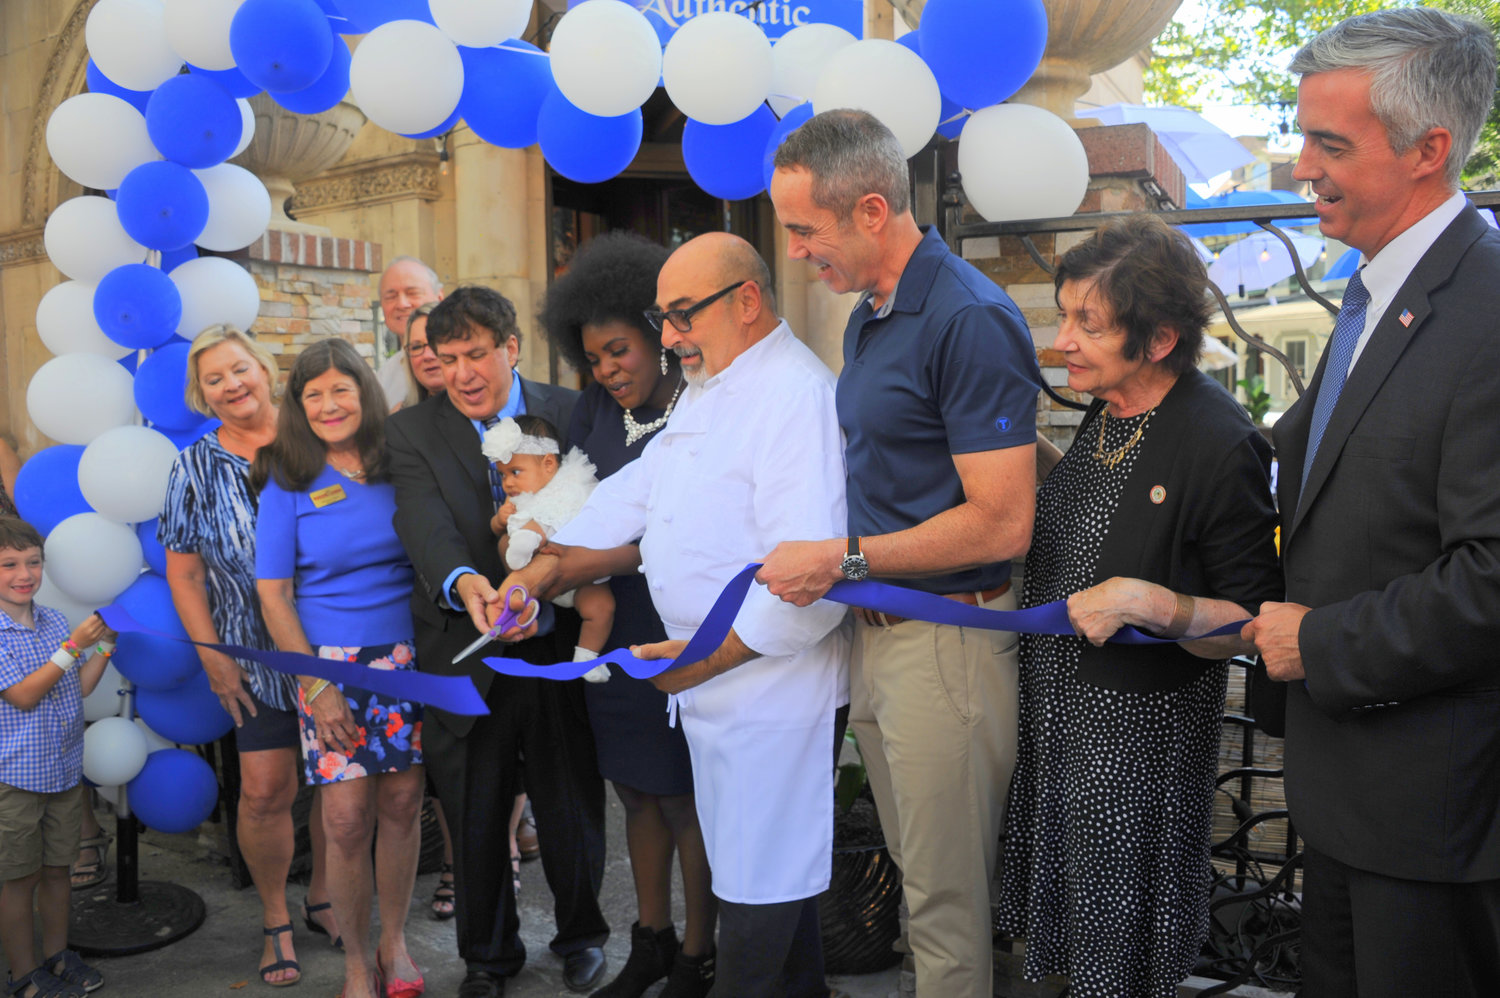 Susana, with baby Francesca, and Franco Federico, Matzah Balls Jewish Deli owners, cut the ribbon at Matzah Balls Jewish Deli’s grand opening Aug. 19 in downtown Doylestown. At right are state Sen. Steve Santarsiero, Mayor Noni West and Bucks County Commissioner Robert Harvie Jr.